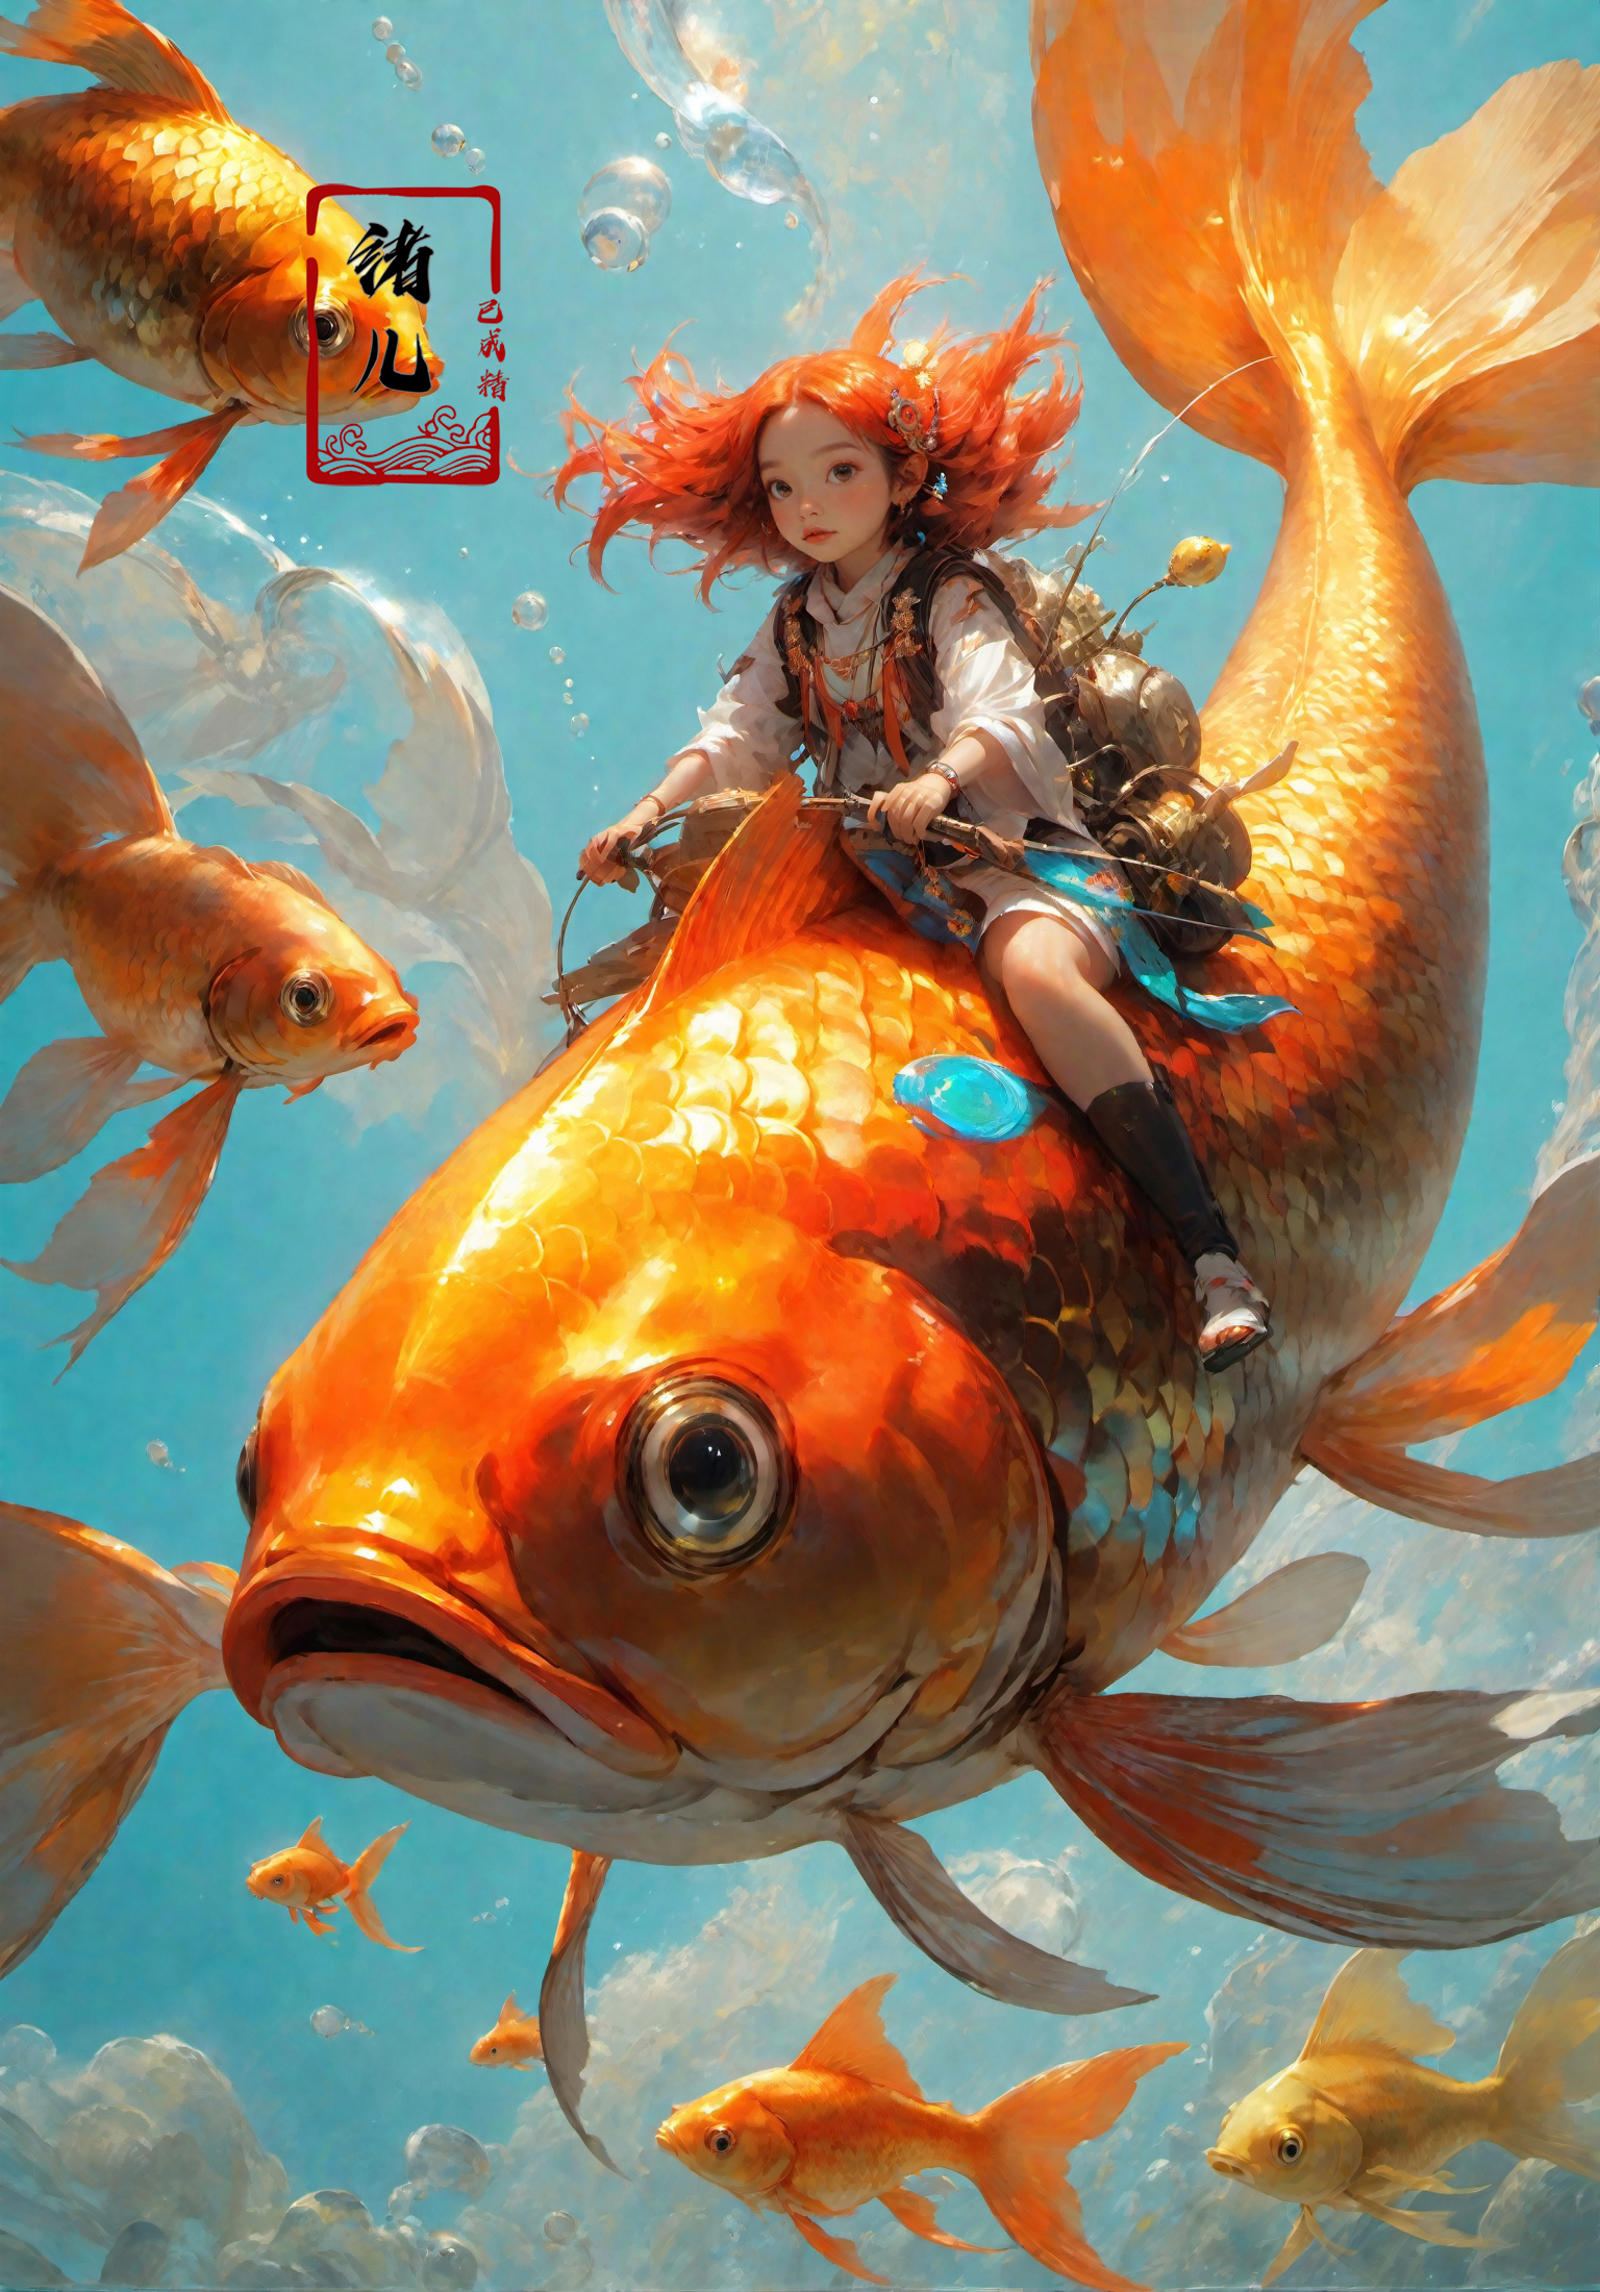 A girl riding on top of a goldfish in a painting.